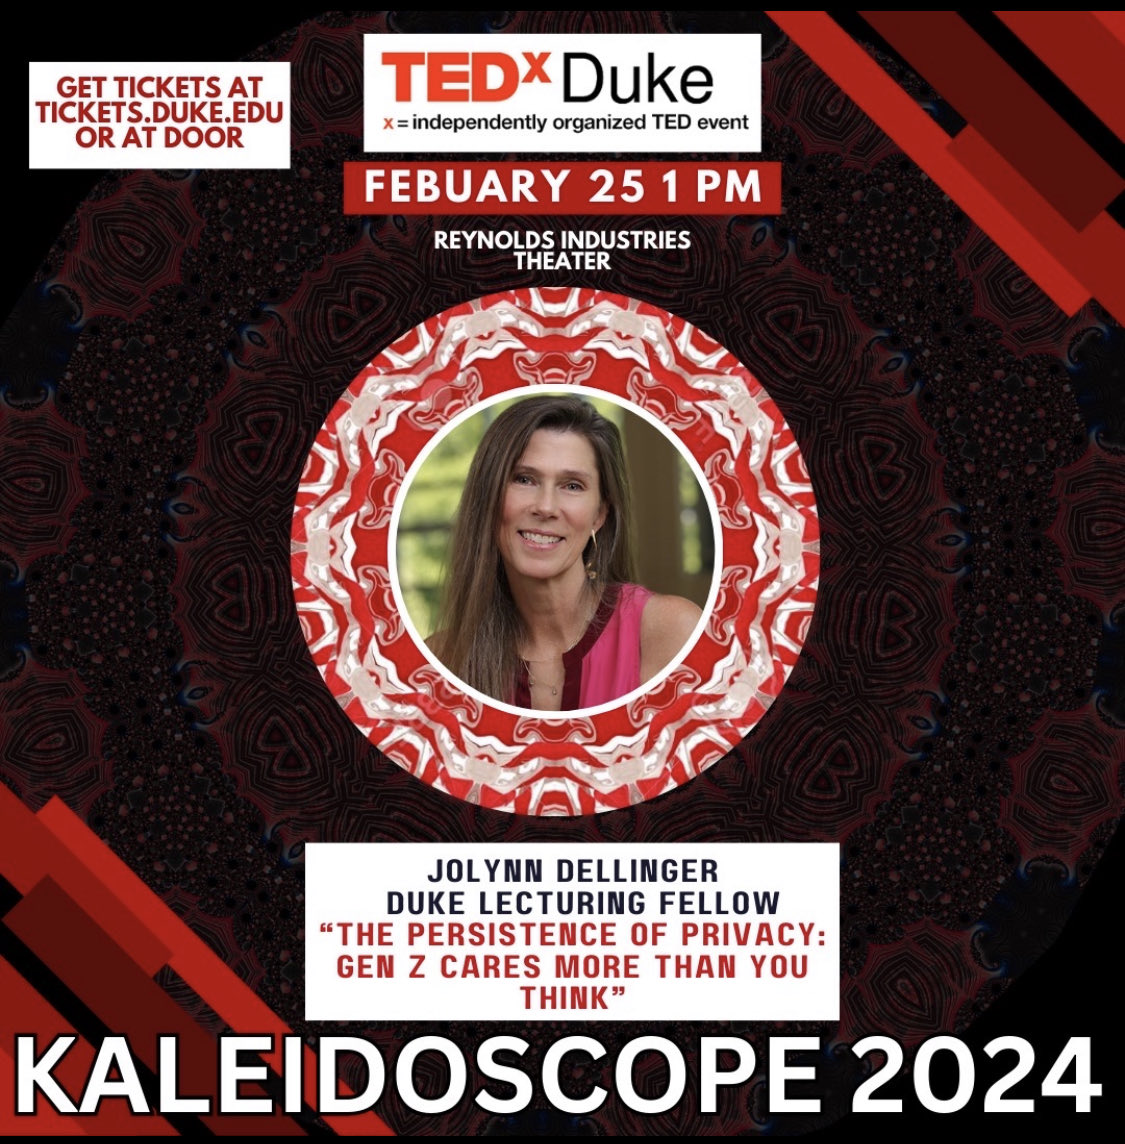 Huge thanks to the crew at Tedx at Duke for running a seamless terrific program. And to Emily Caplan and Catie Fristoe for everything. @DukeU @TEDxDuke Appreciated the chance to talk about #privacy.